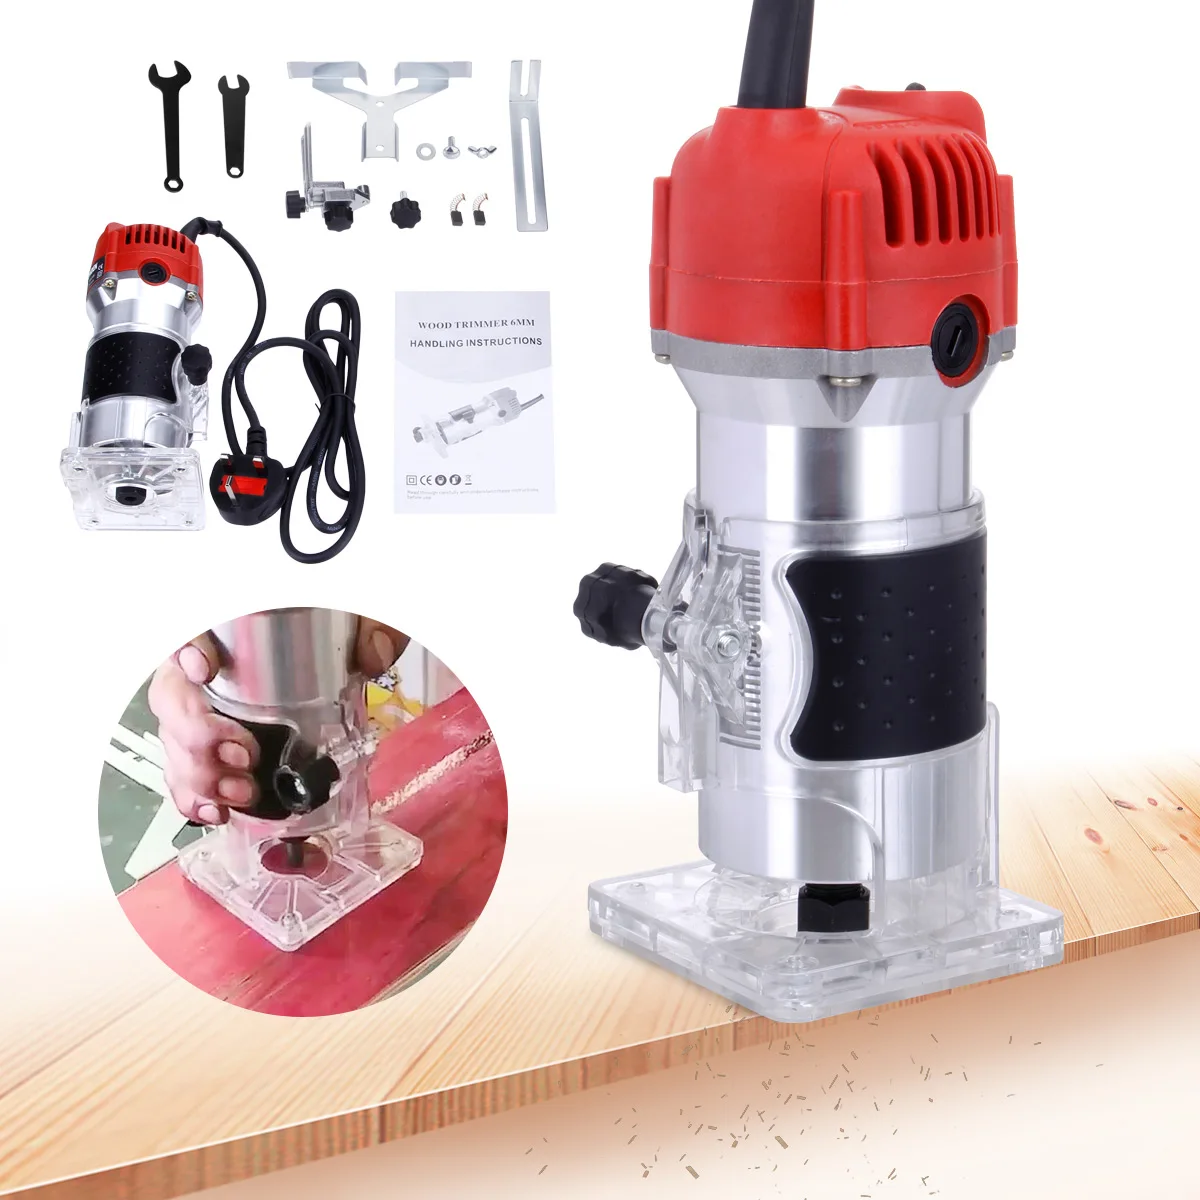 

800W Electric Wood Trimmer 30000RPM Electric Wood Router AU Plug Woodworking Milling Engraving Slotting Trimming Carving Machine